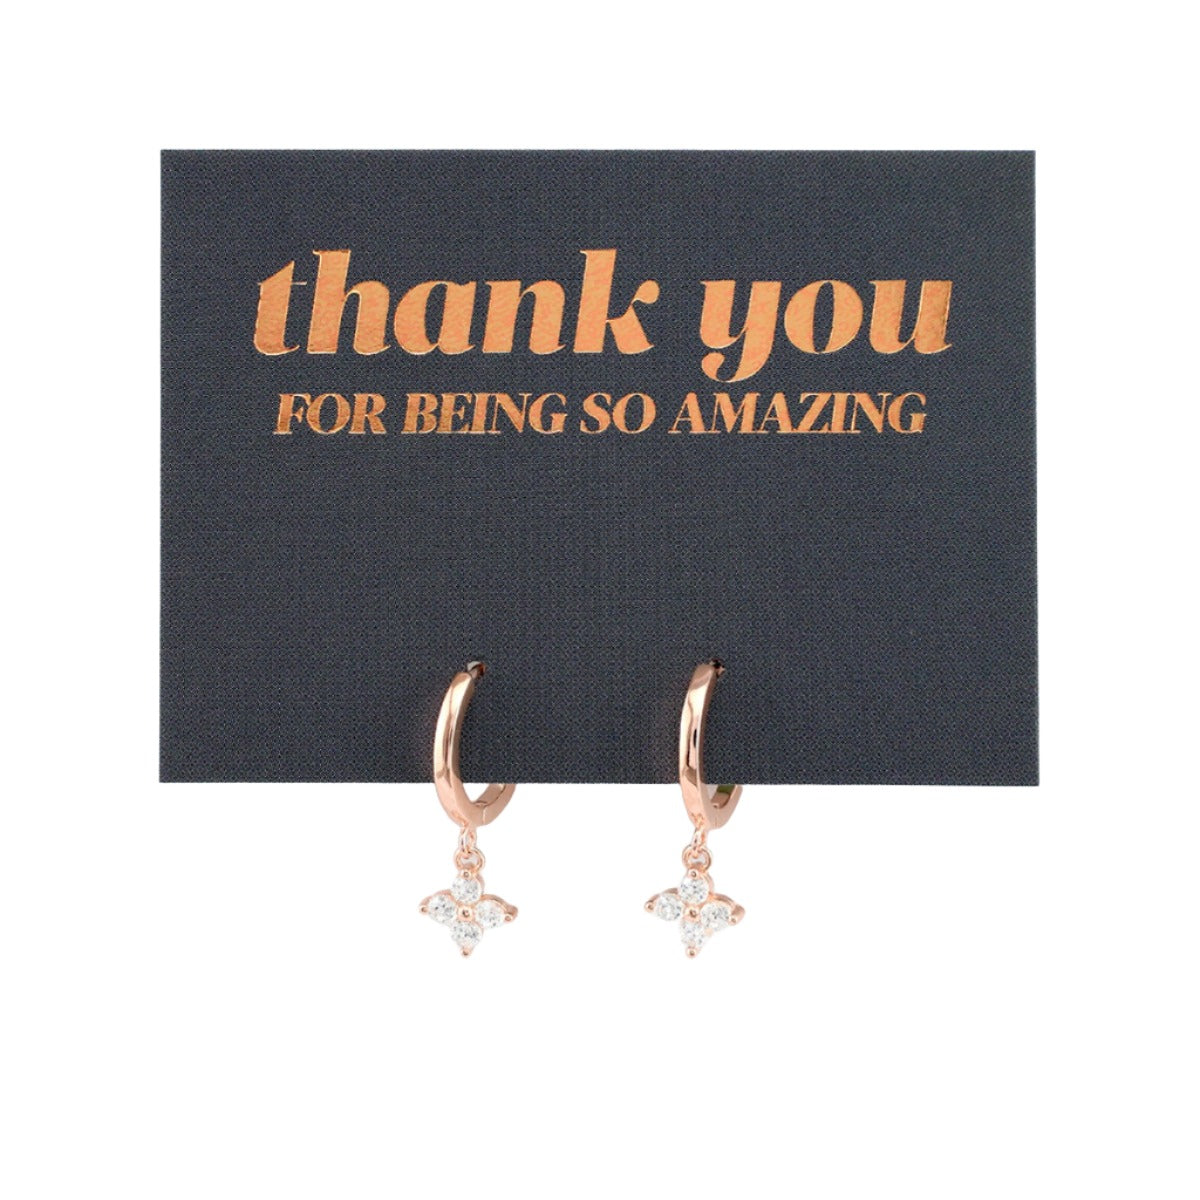 HUGGIES - Thank You For Being So Amazing - 18K Rose Gold Sterling Silver Hoops with Cubic Zirconia Star Charm (2214-F)